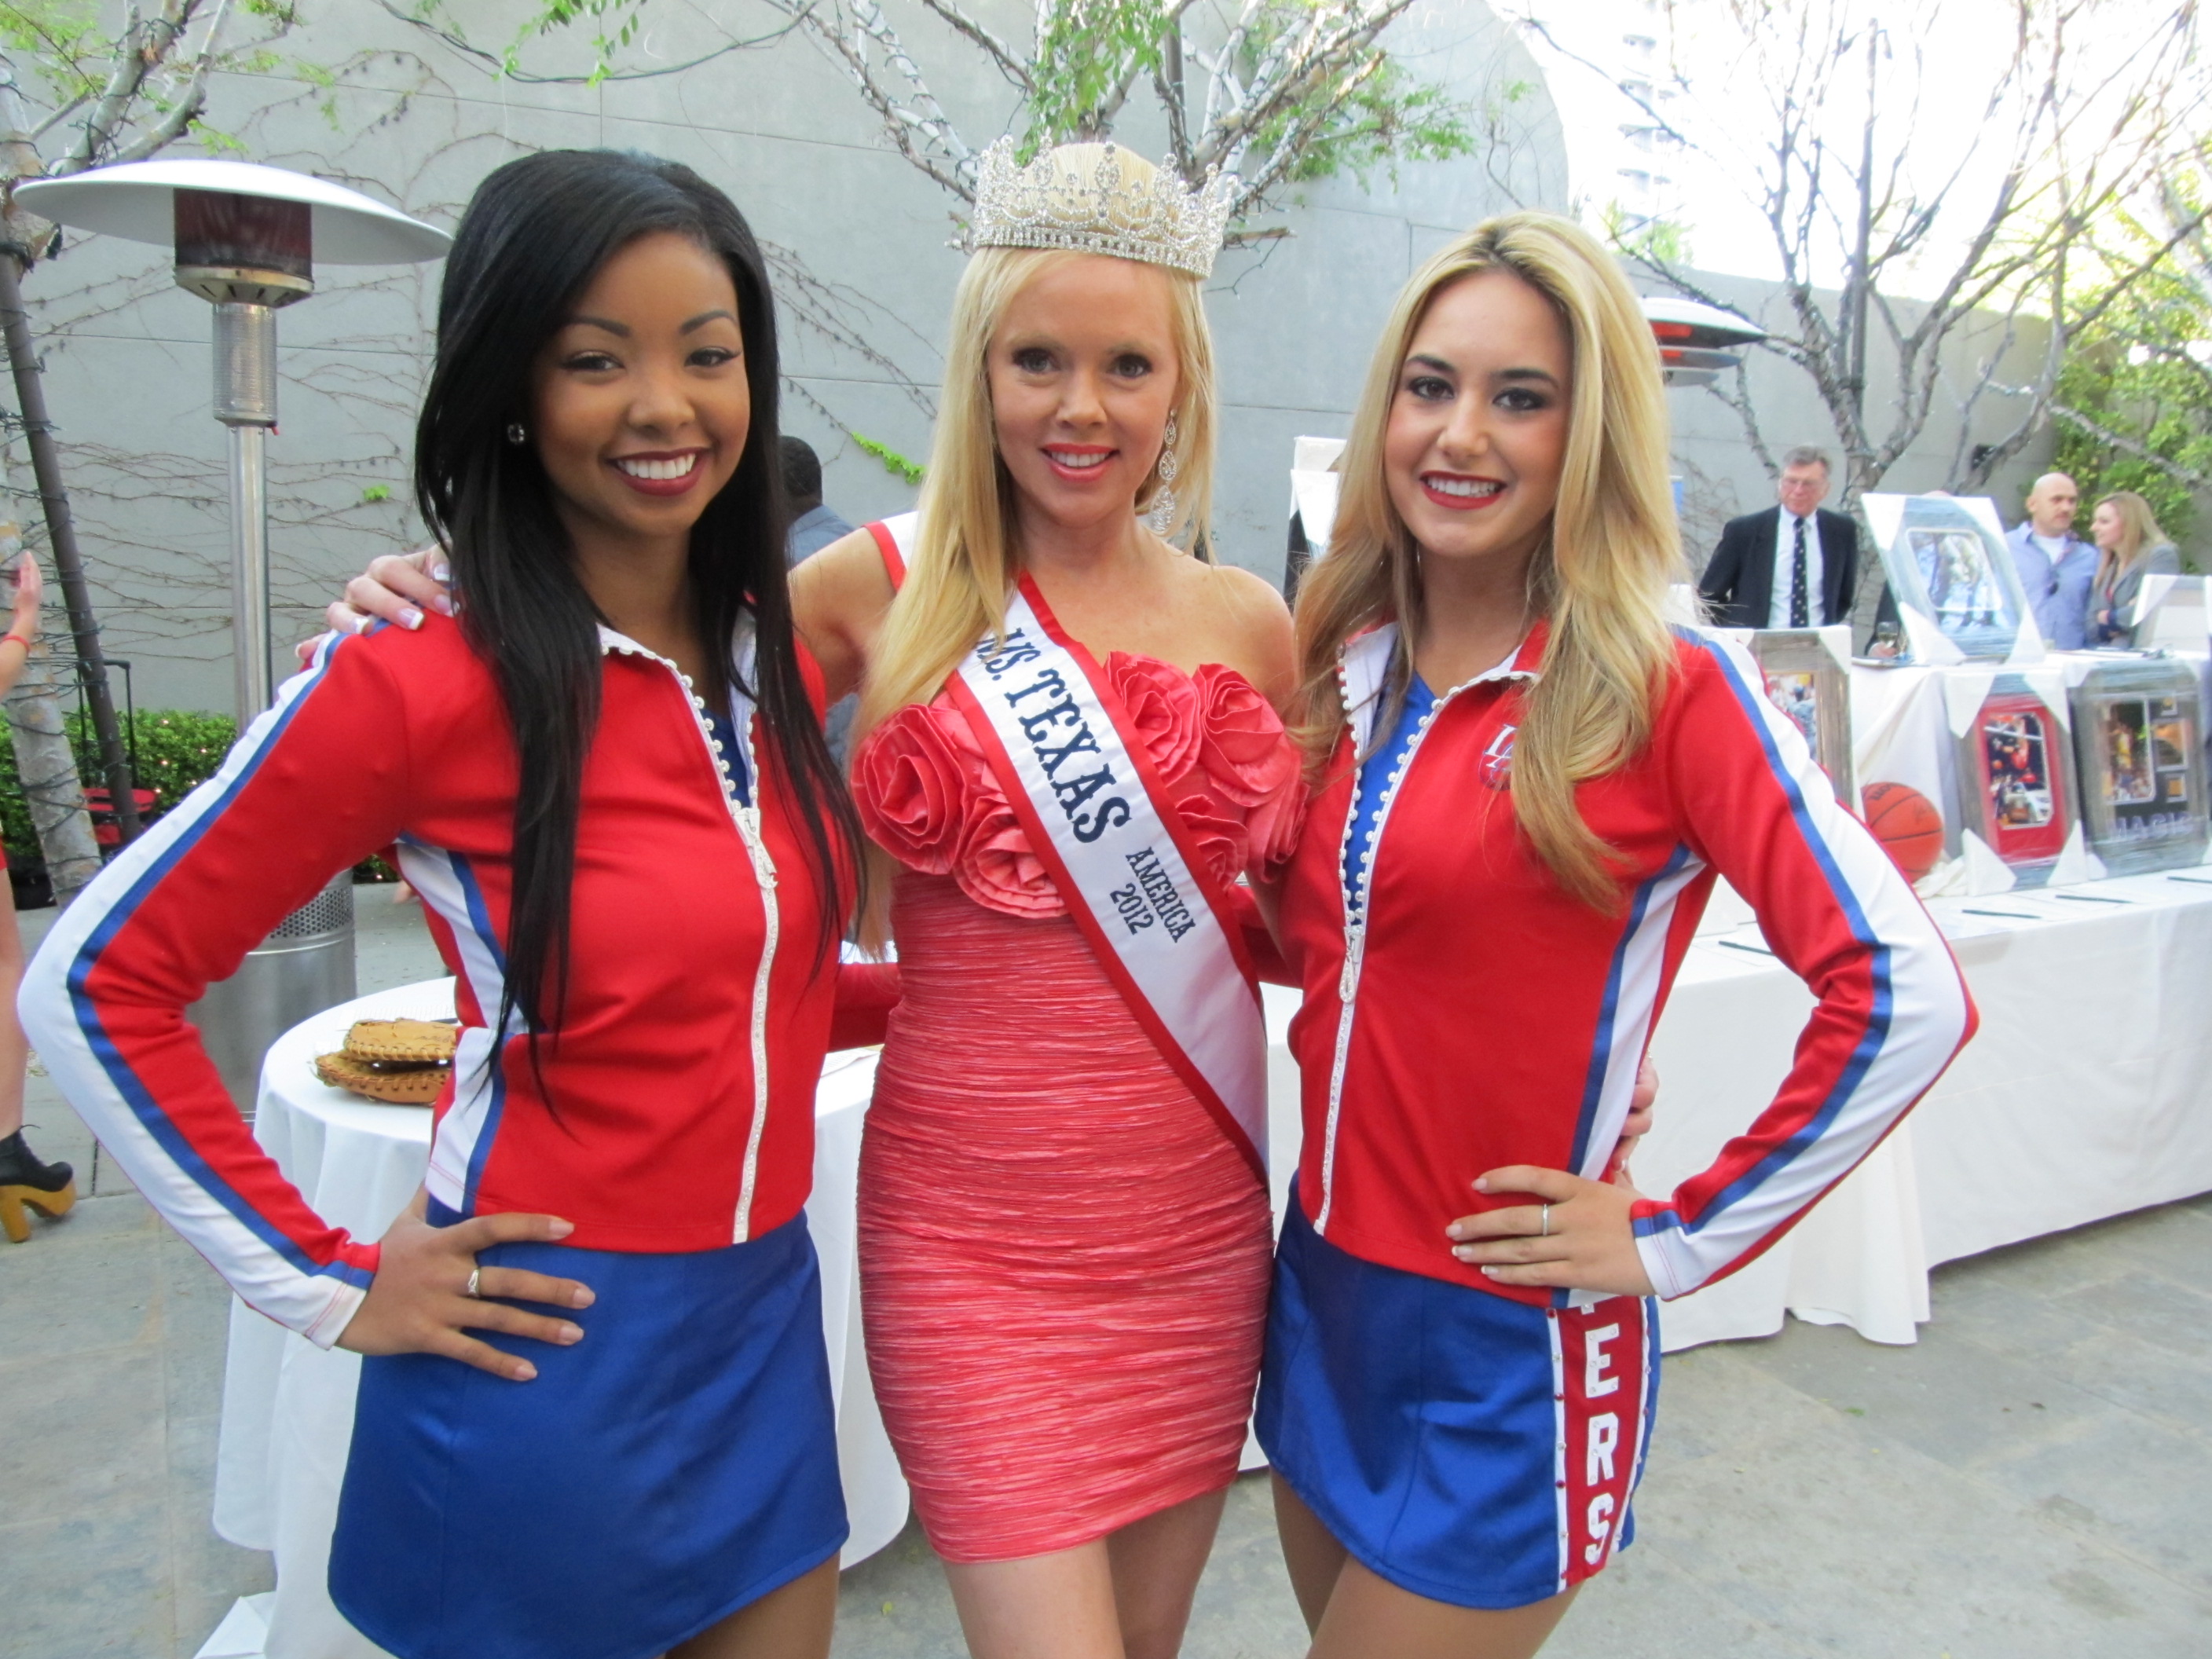 Ms Texas 2012 Shanna Olson with the Clipper girls